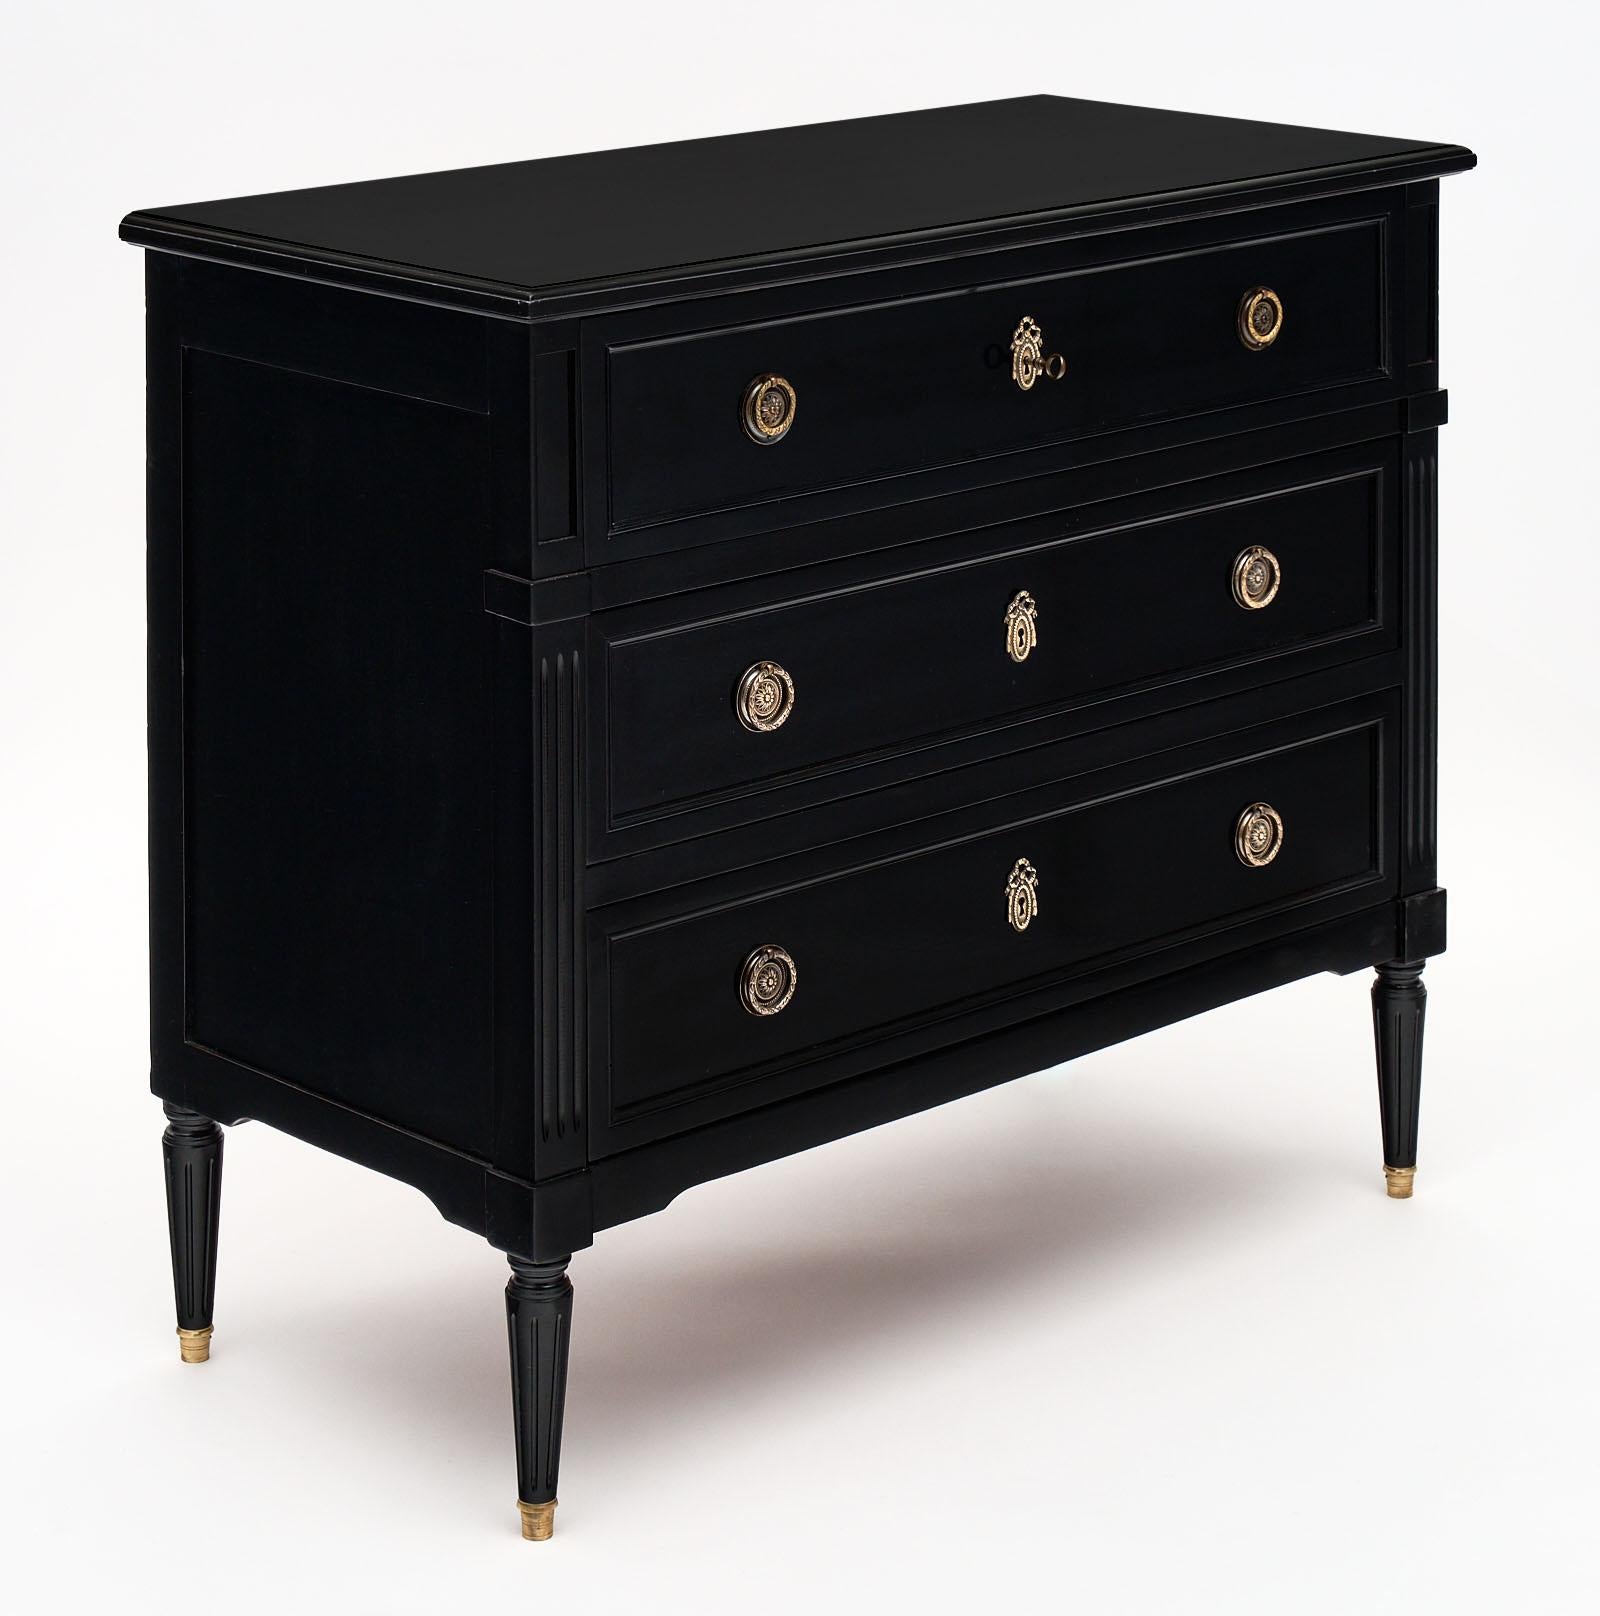 Ebonized antique French Louis XVI chest of drawers made of mahogany and finished with an ebony French polish for luster. This piece has three dovetailed drawers, tapered legs, and finely cast hardware original to the piece. The top drawer has a